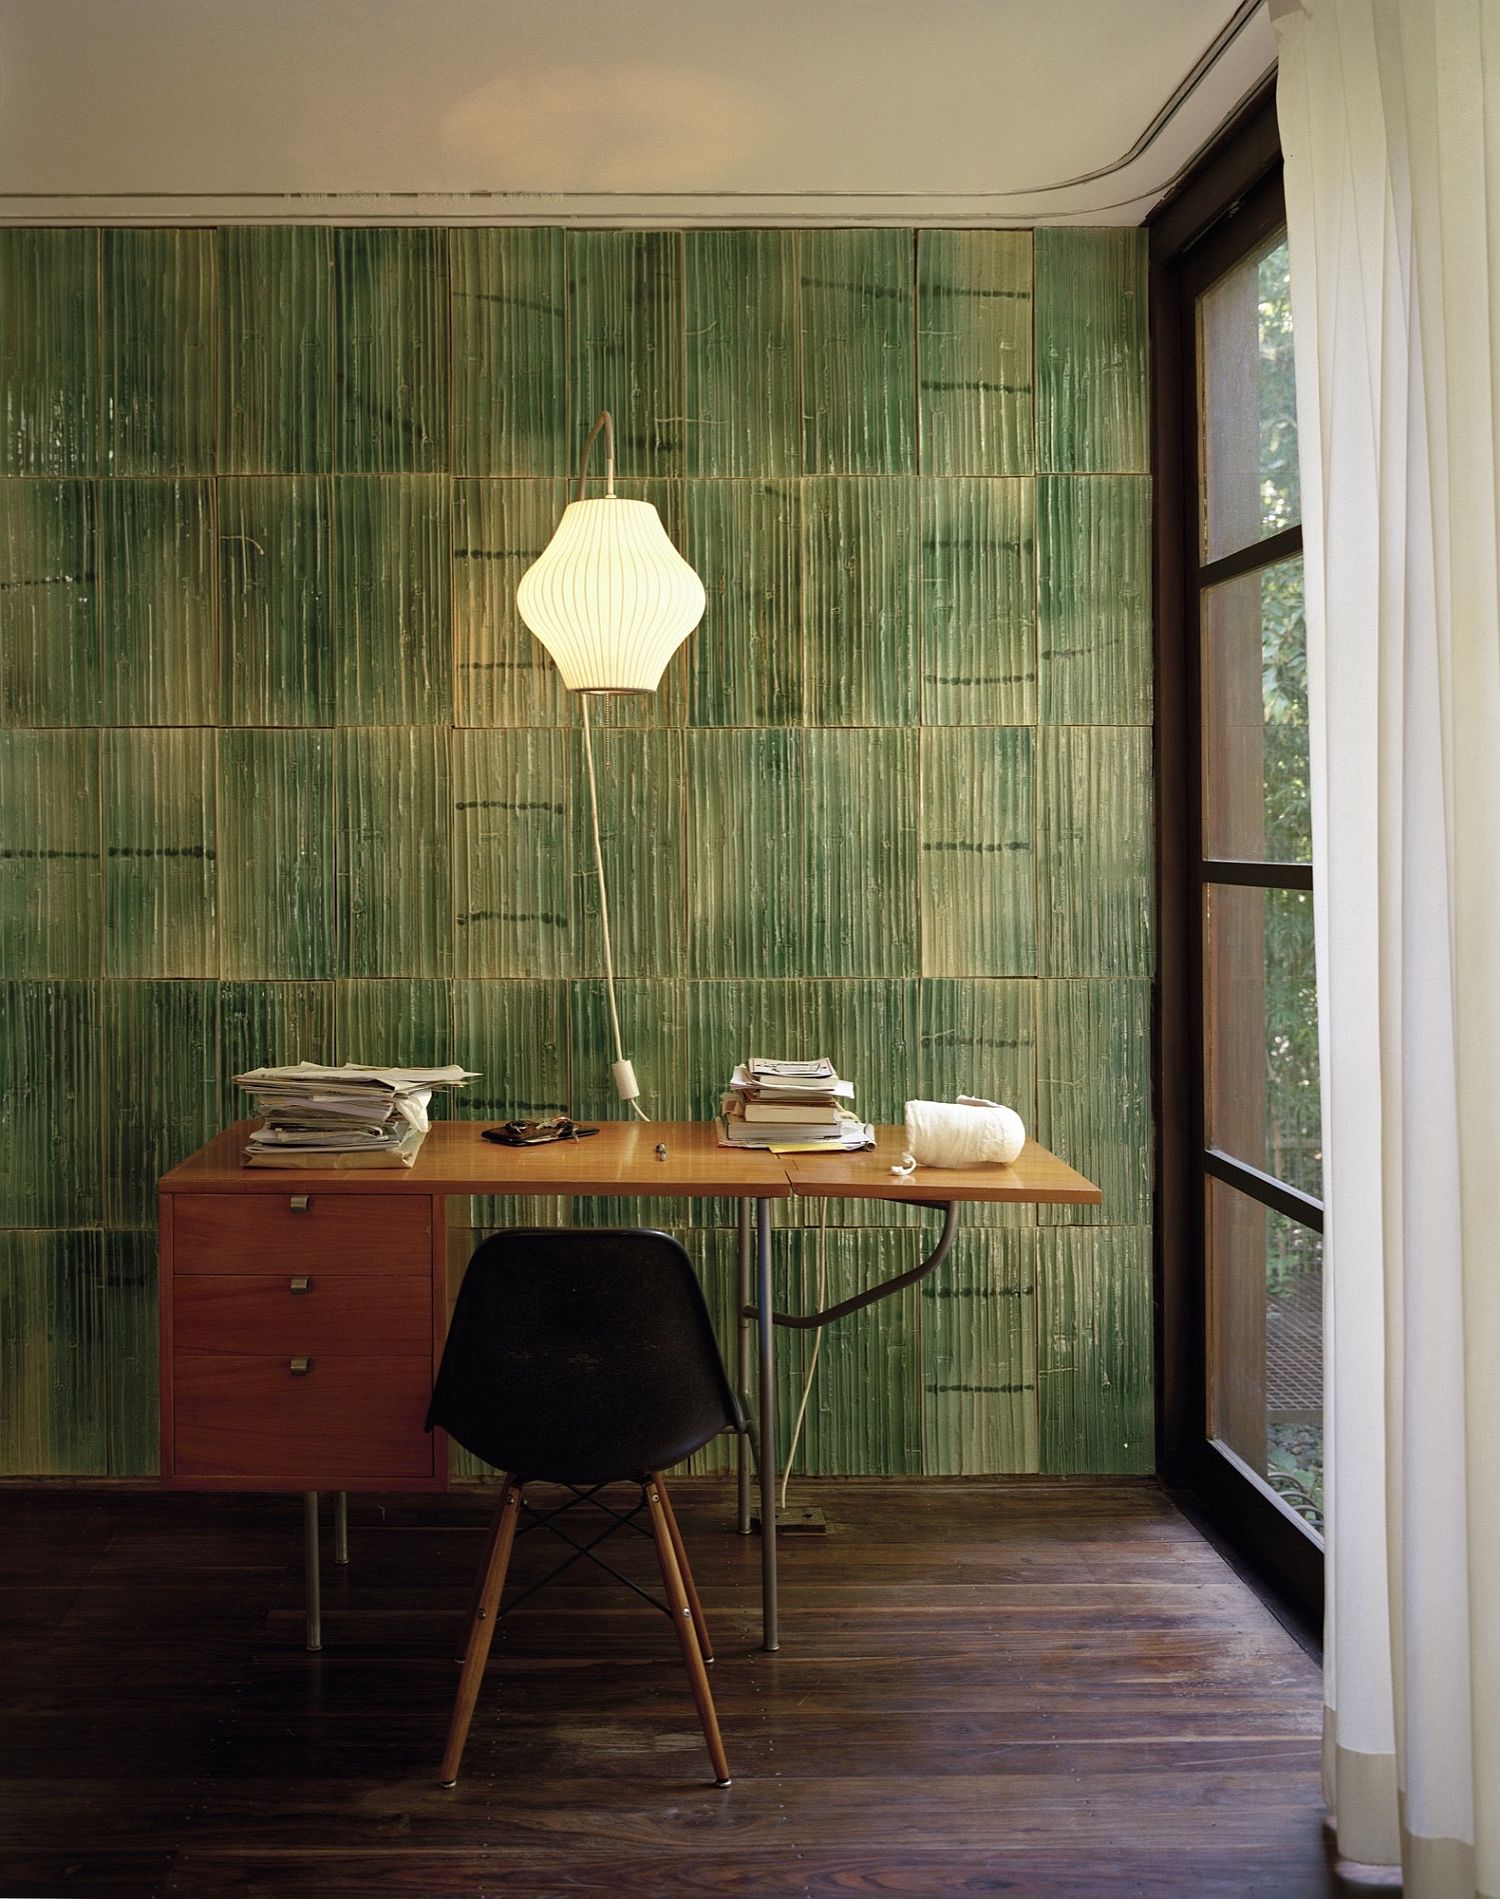 Custom green tiles on the wall add ro the Asian style of the interior